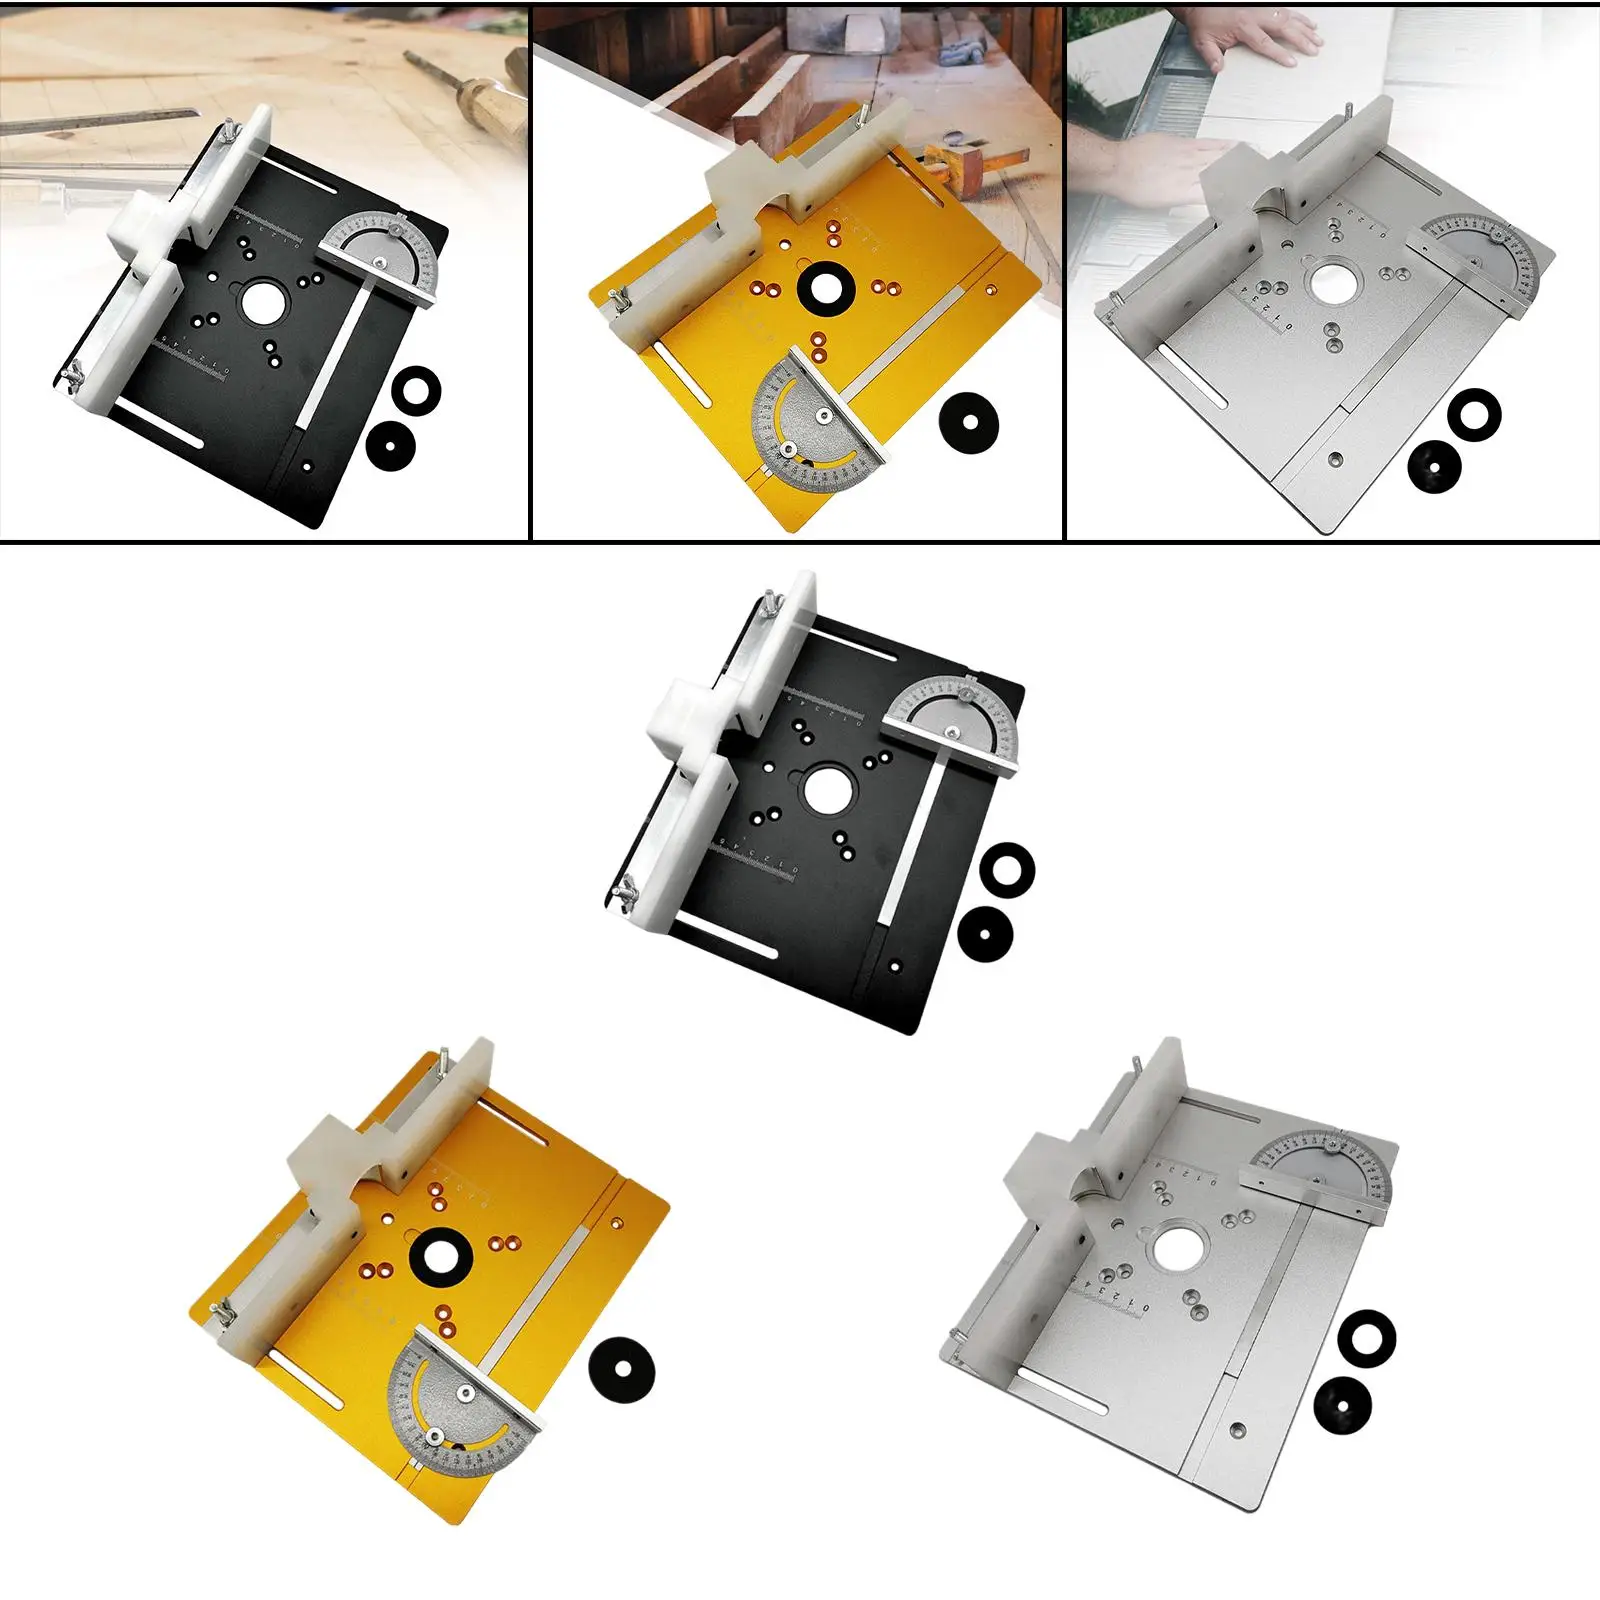 Aluminium Table Insert Tool Templates Gauge Guide Trimmer Tools Sliding Brackets Table for Woodworking